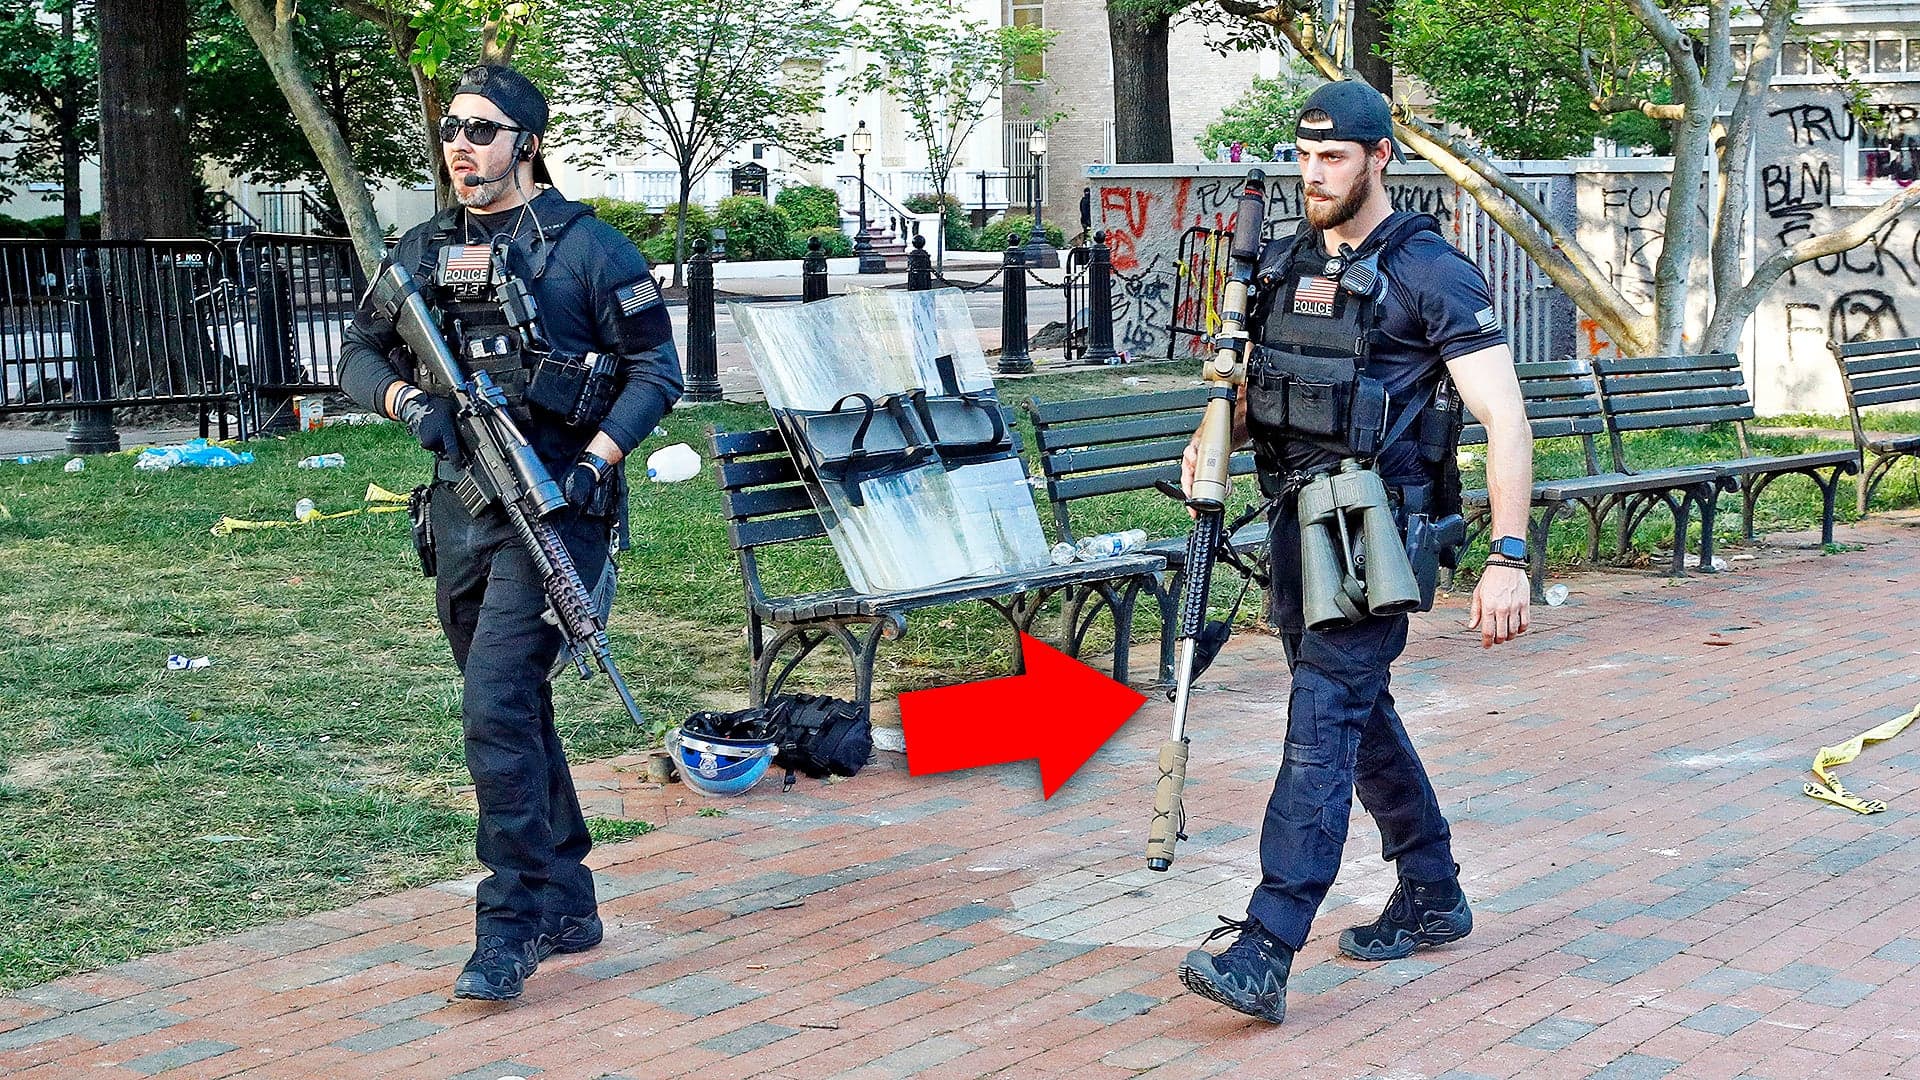 About That Huge Rifle The Secret Service Sniper Was Carrying During Trump’s Photo Op Walk